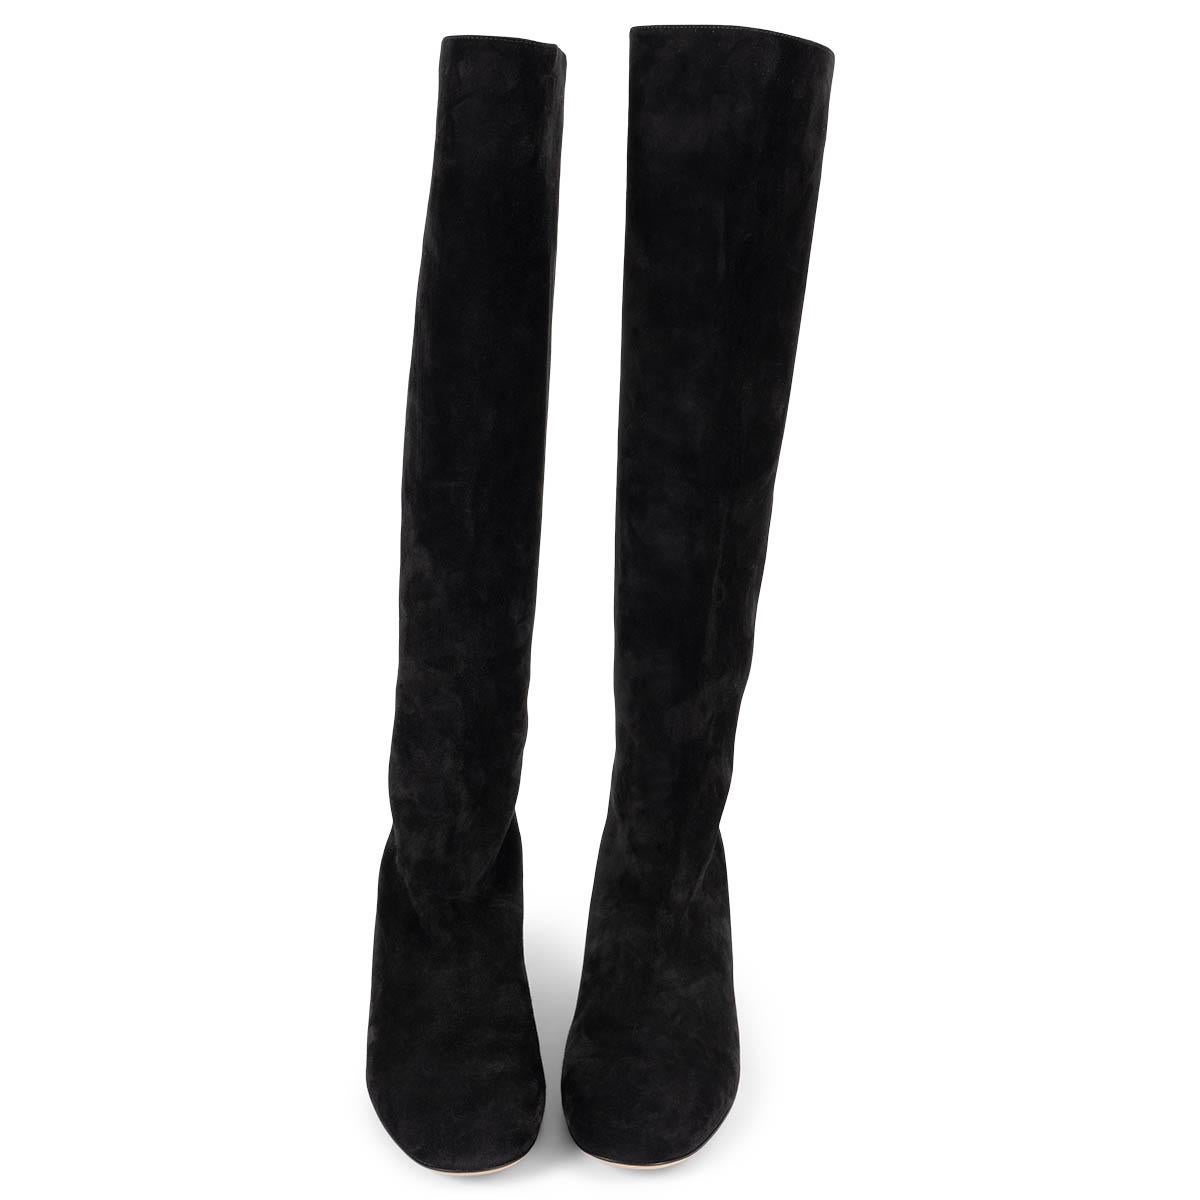 100% authentic Salvatore Ferragamo Vetto 55 knee-high block-heel boots in black suede. The design features a round-toe, pull-on style, a gold-tone spike stud at the top back and a gold-tone insert at the heel. Brand new. Come with dust bag.